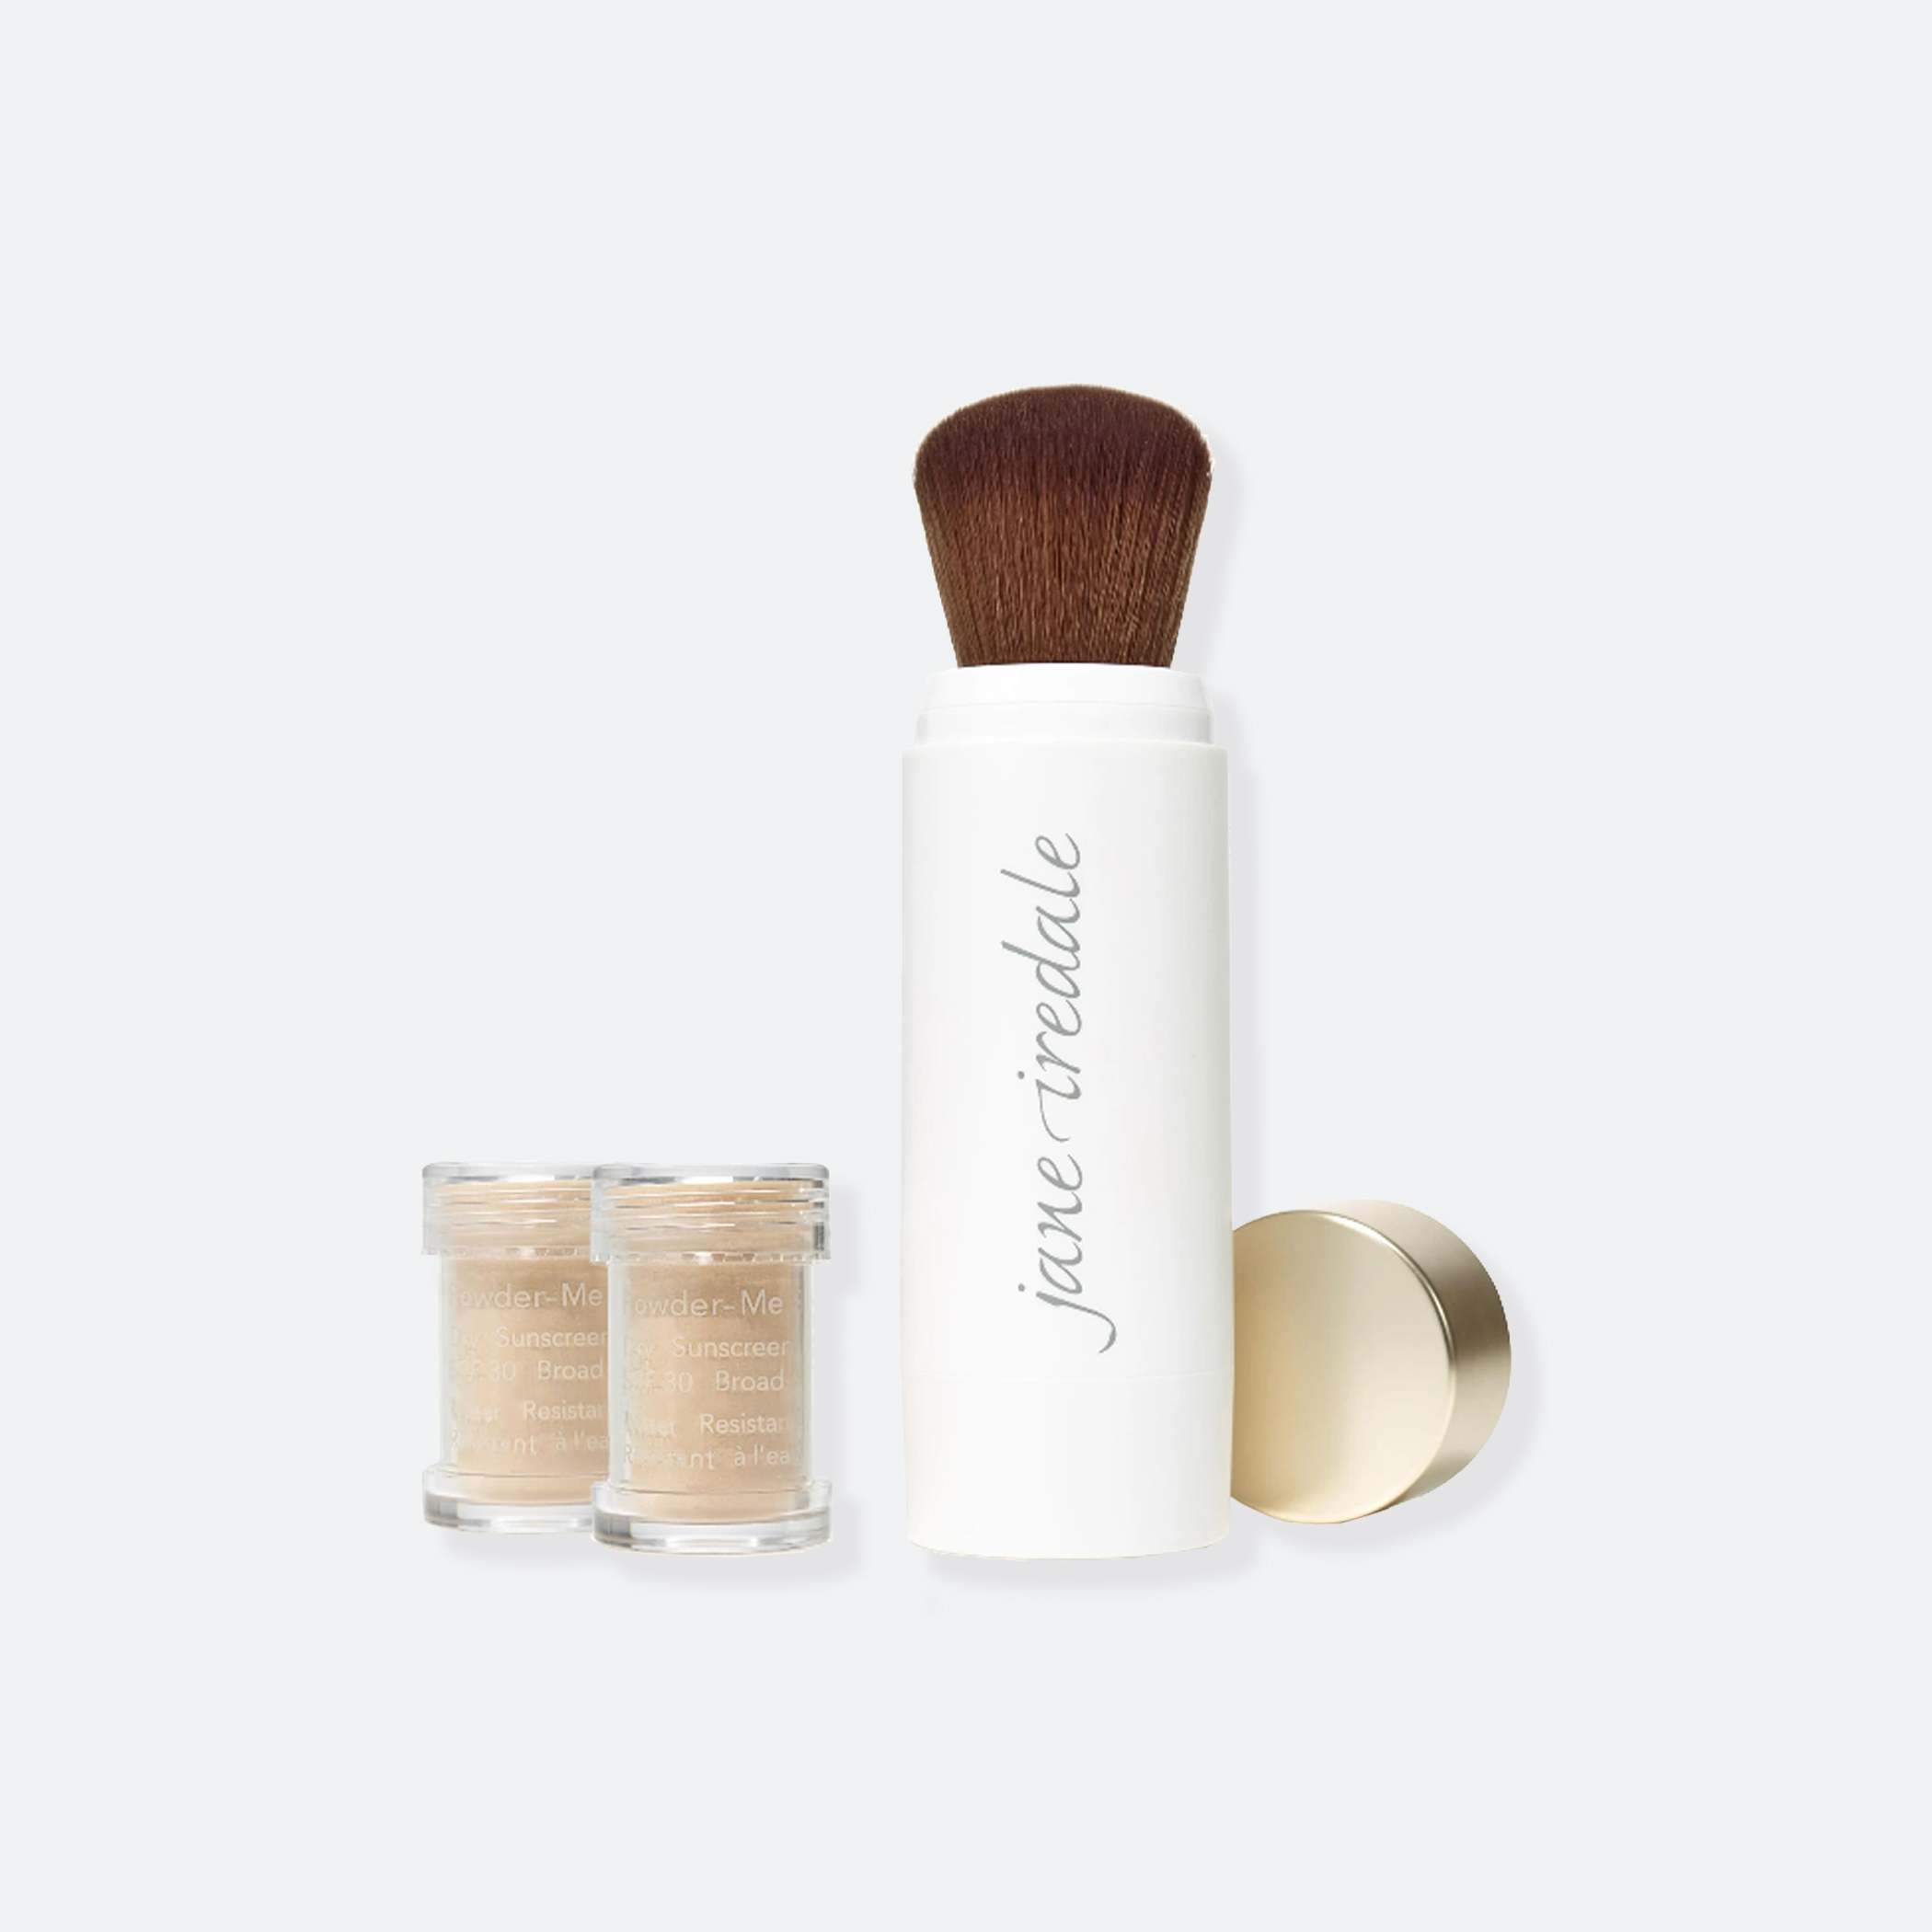 OhMart Jane iredale Powder-Me SPF Dry Sunscreen Refillable Brush (Nude) 1